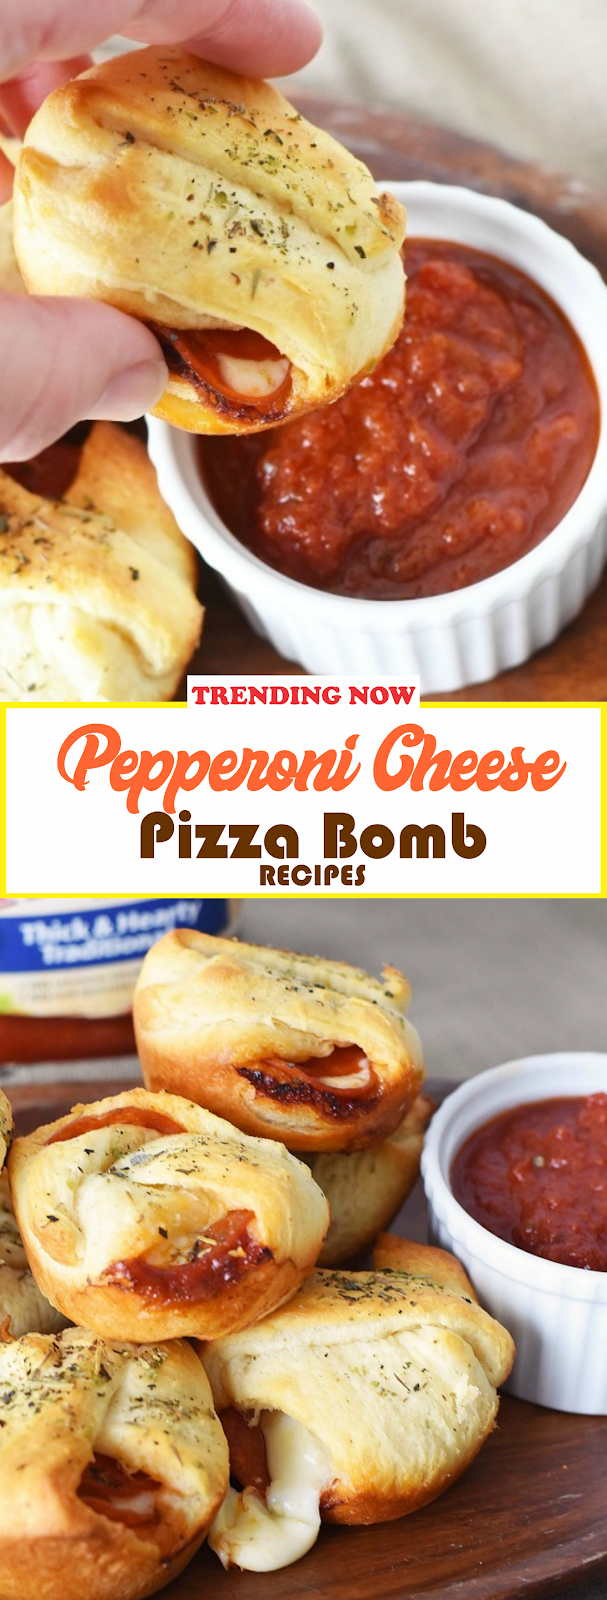 AMAZING PEPPERONI CHEESE PIZZA BOMBS THAT EXPLODE WITH FLAVOR! | Show ...